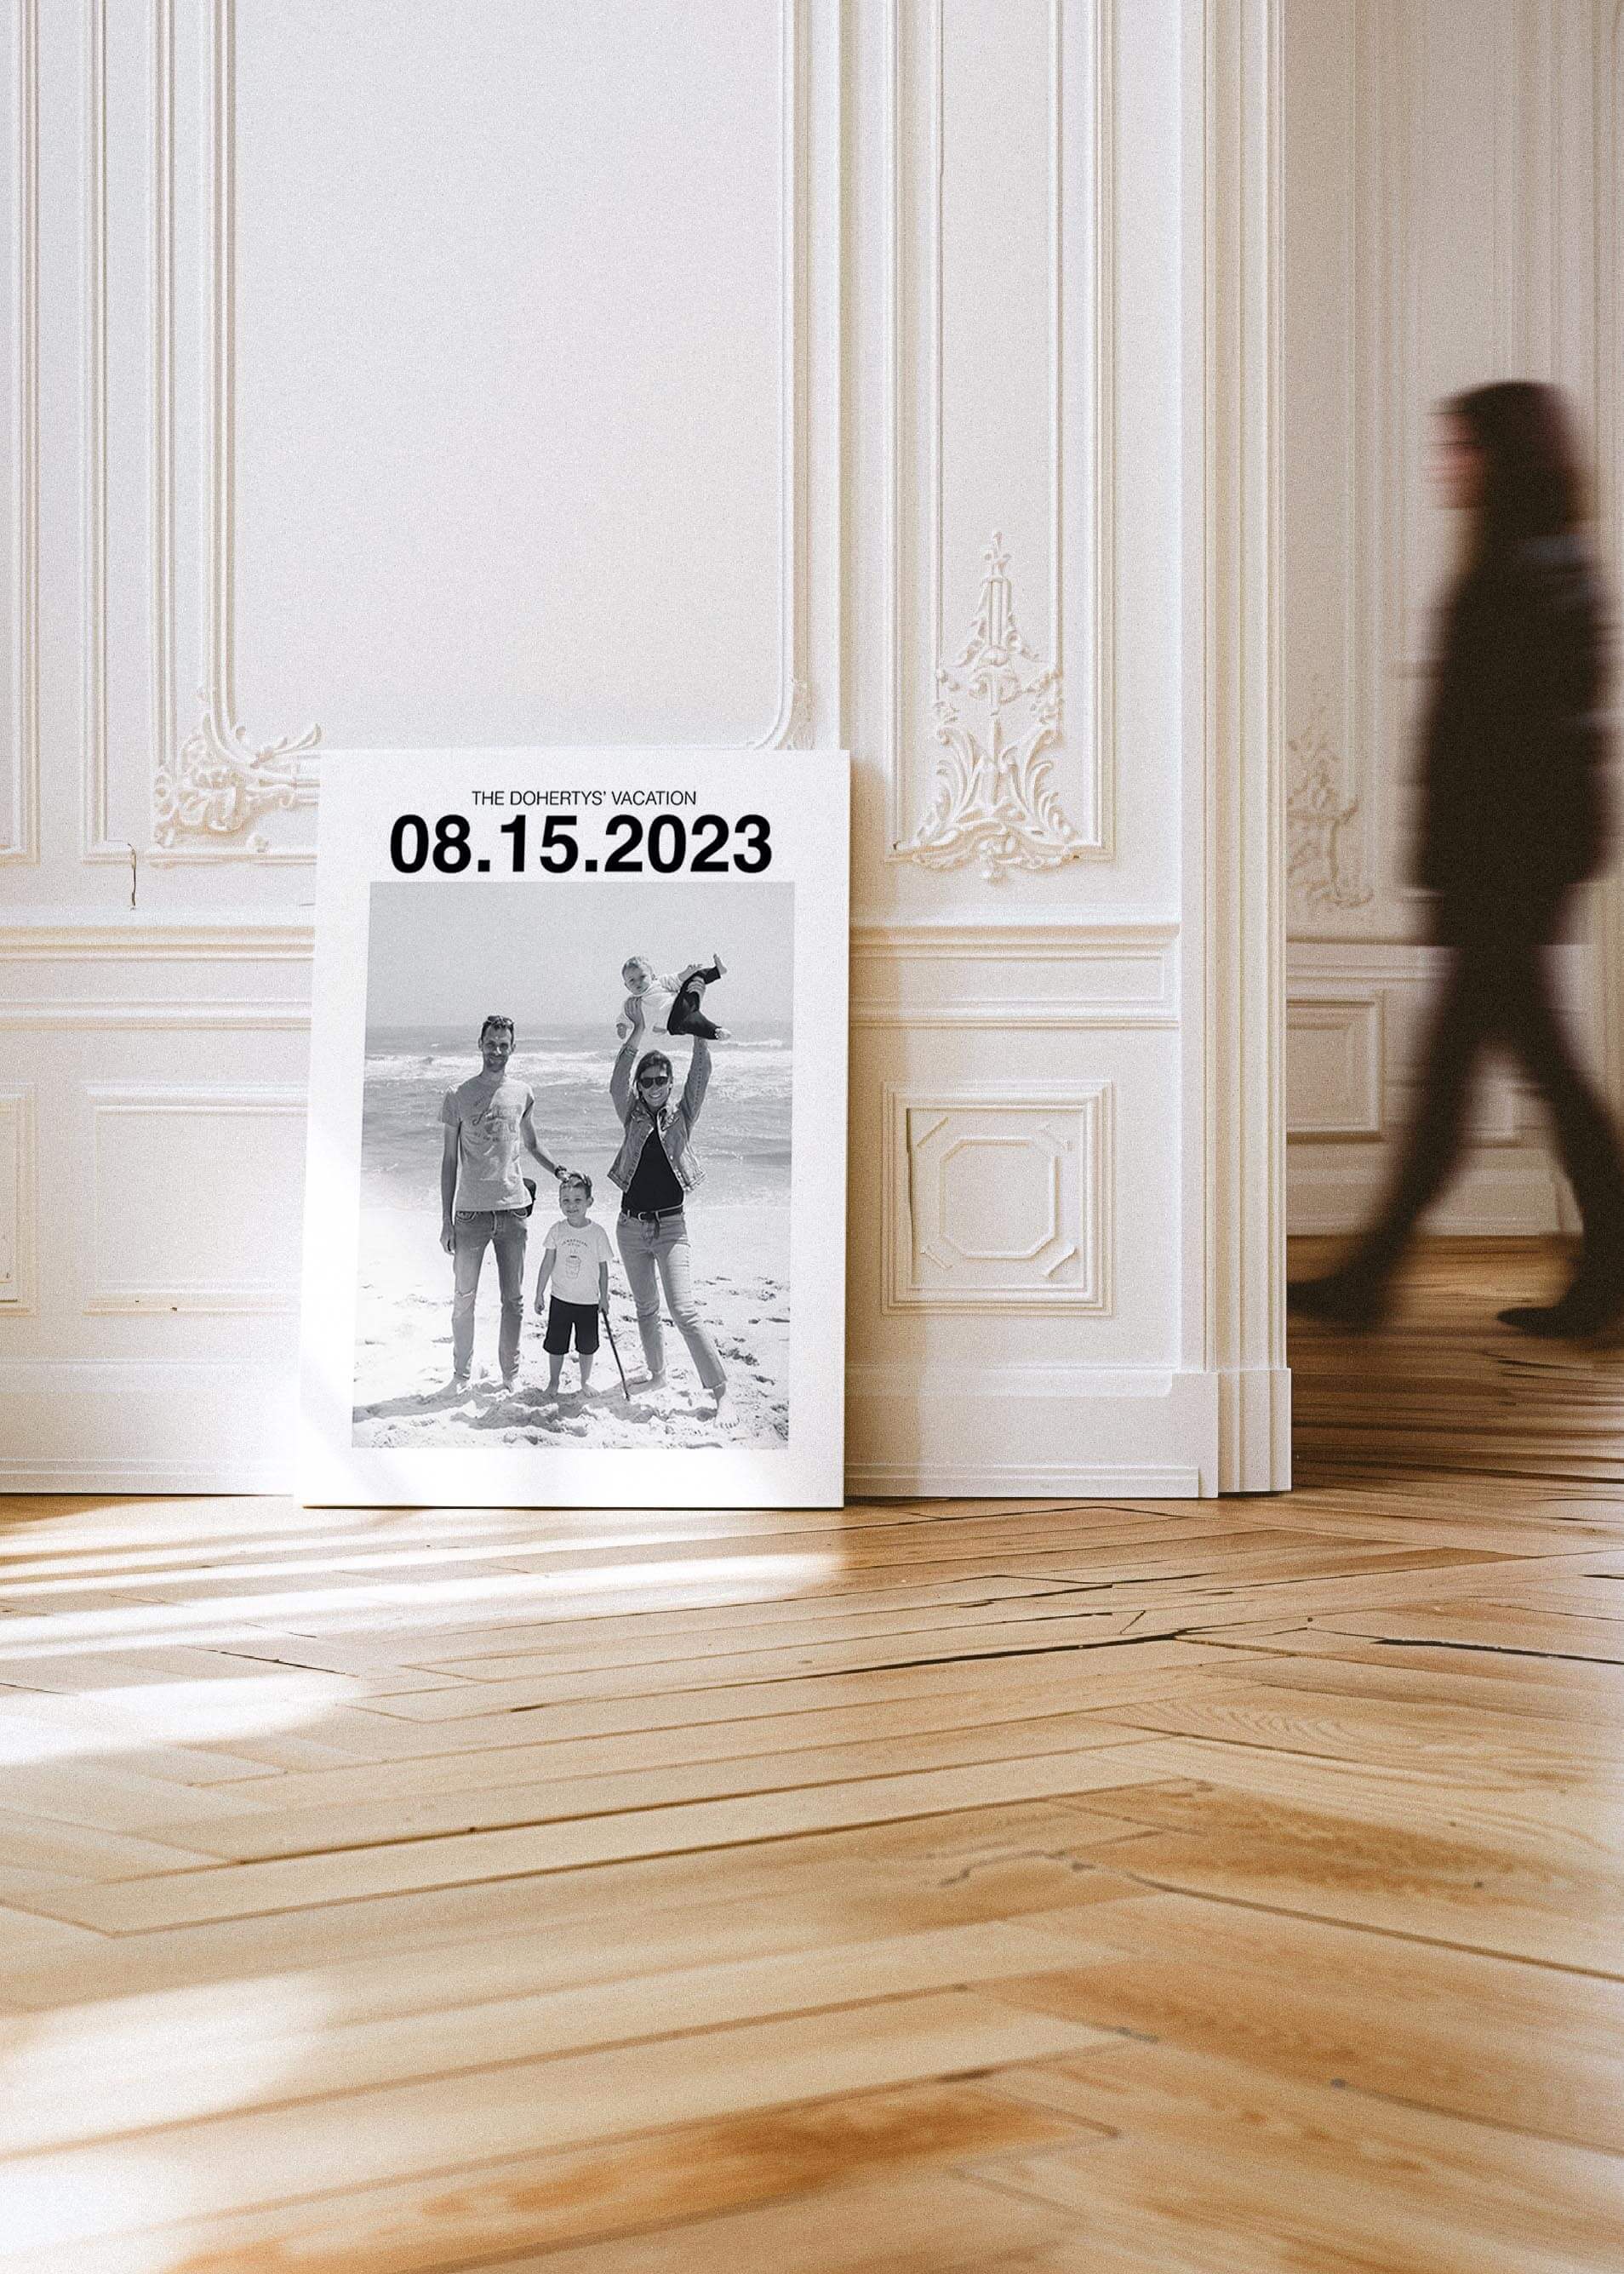 custom personalized black and white photo of a family on holiday. The canvas has a large custom date at the top and the canvas sits against a wall in a contemporary art gallery setting.